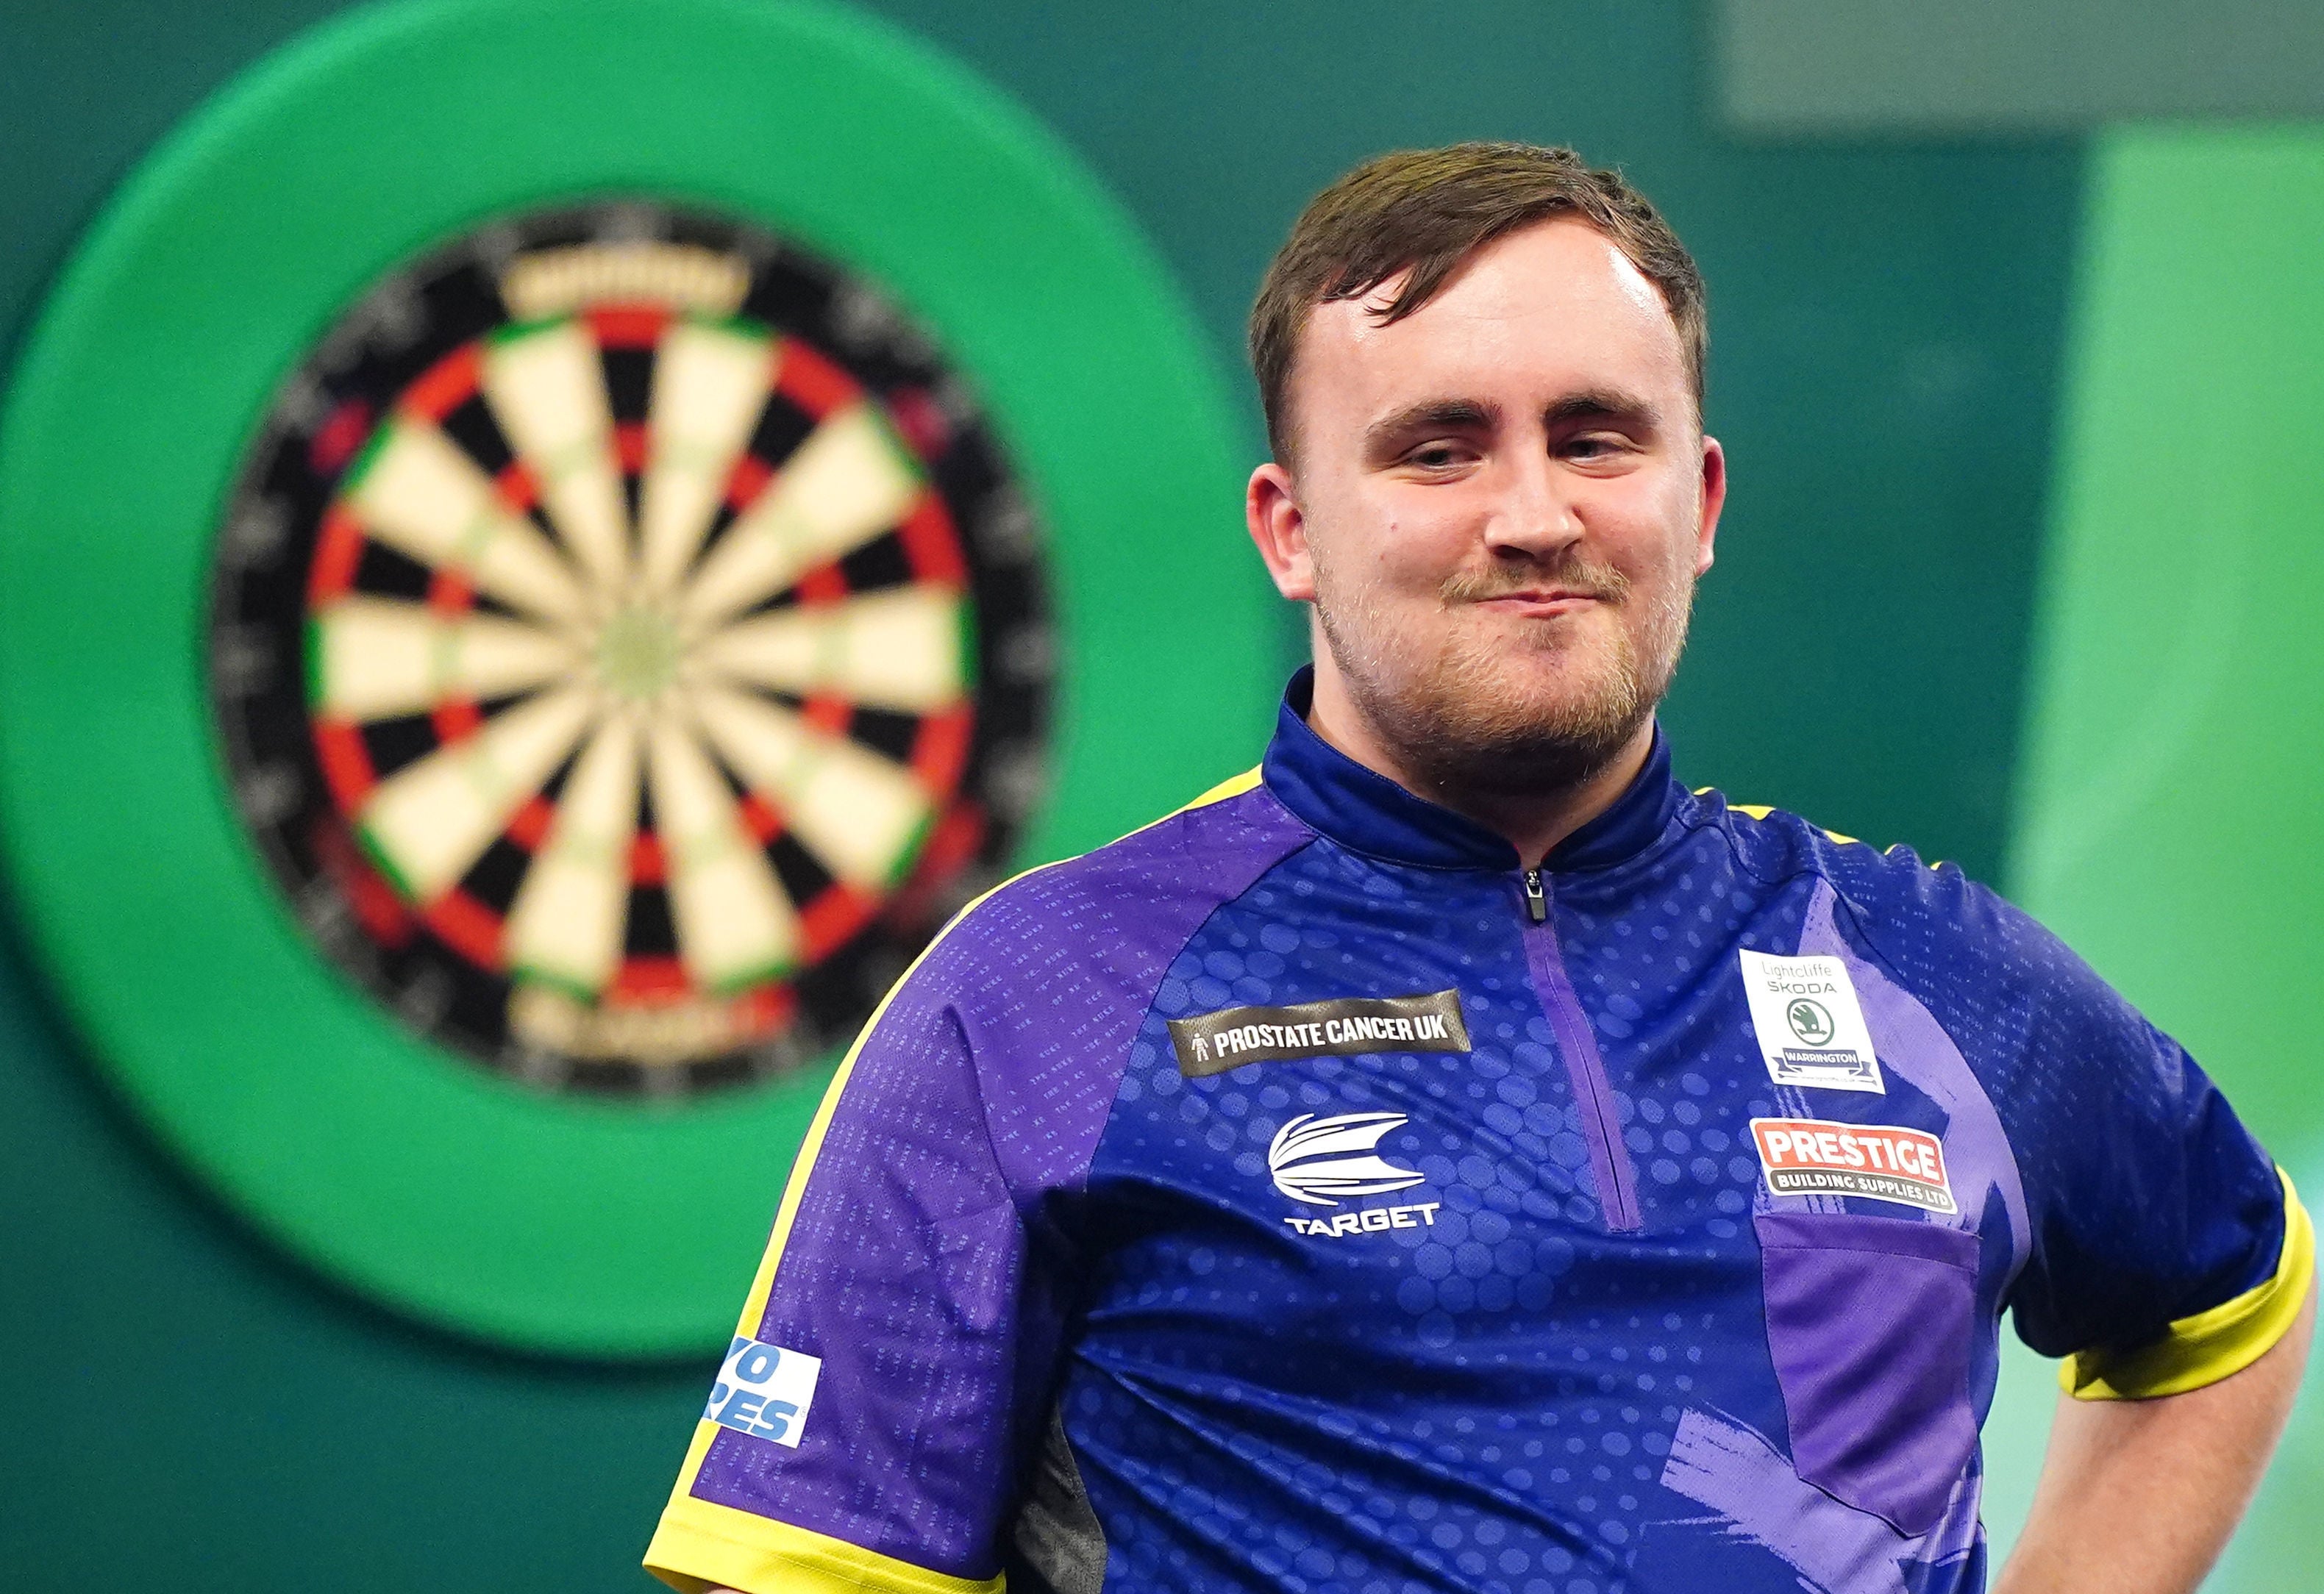 Luke Littler, 16, is the youngest to reach the PDC World Championship final